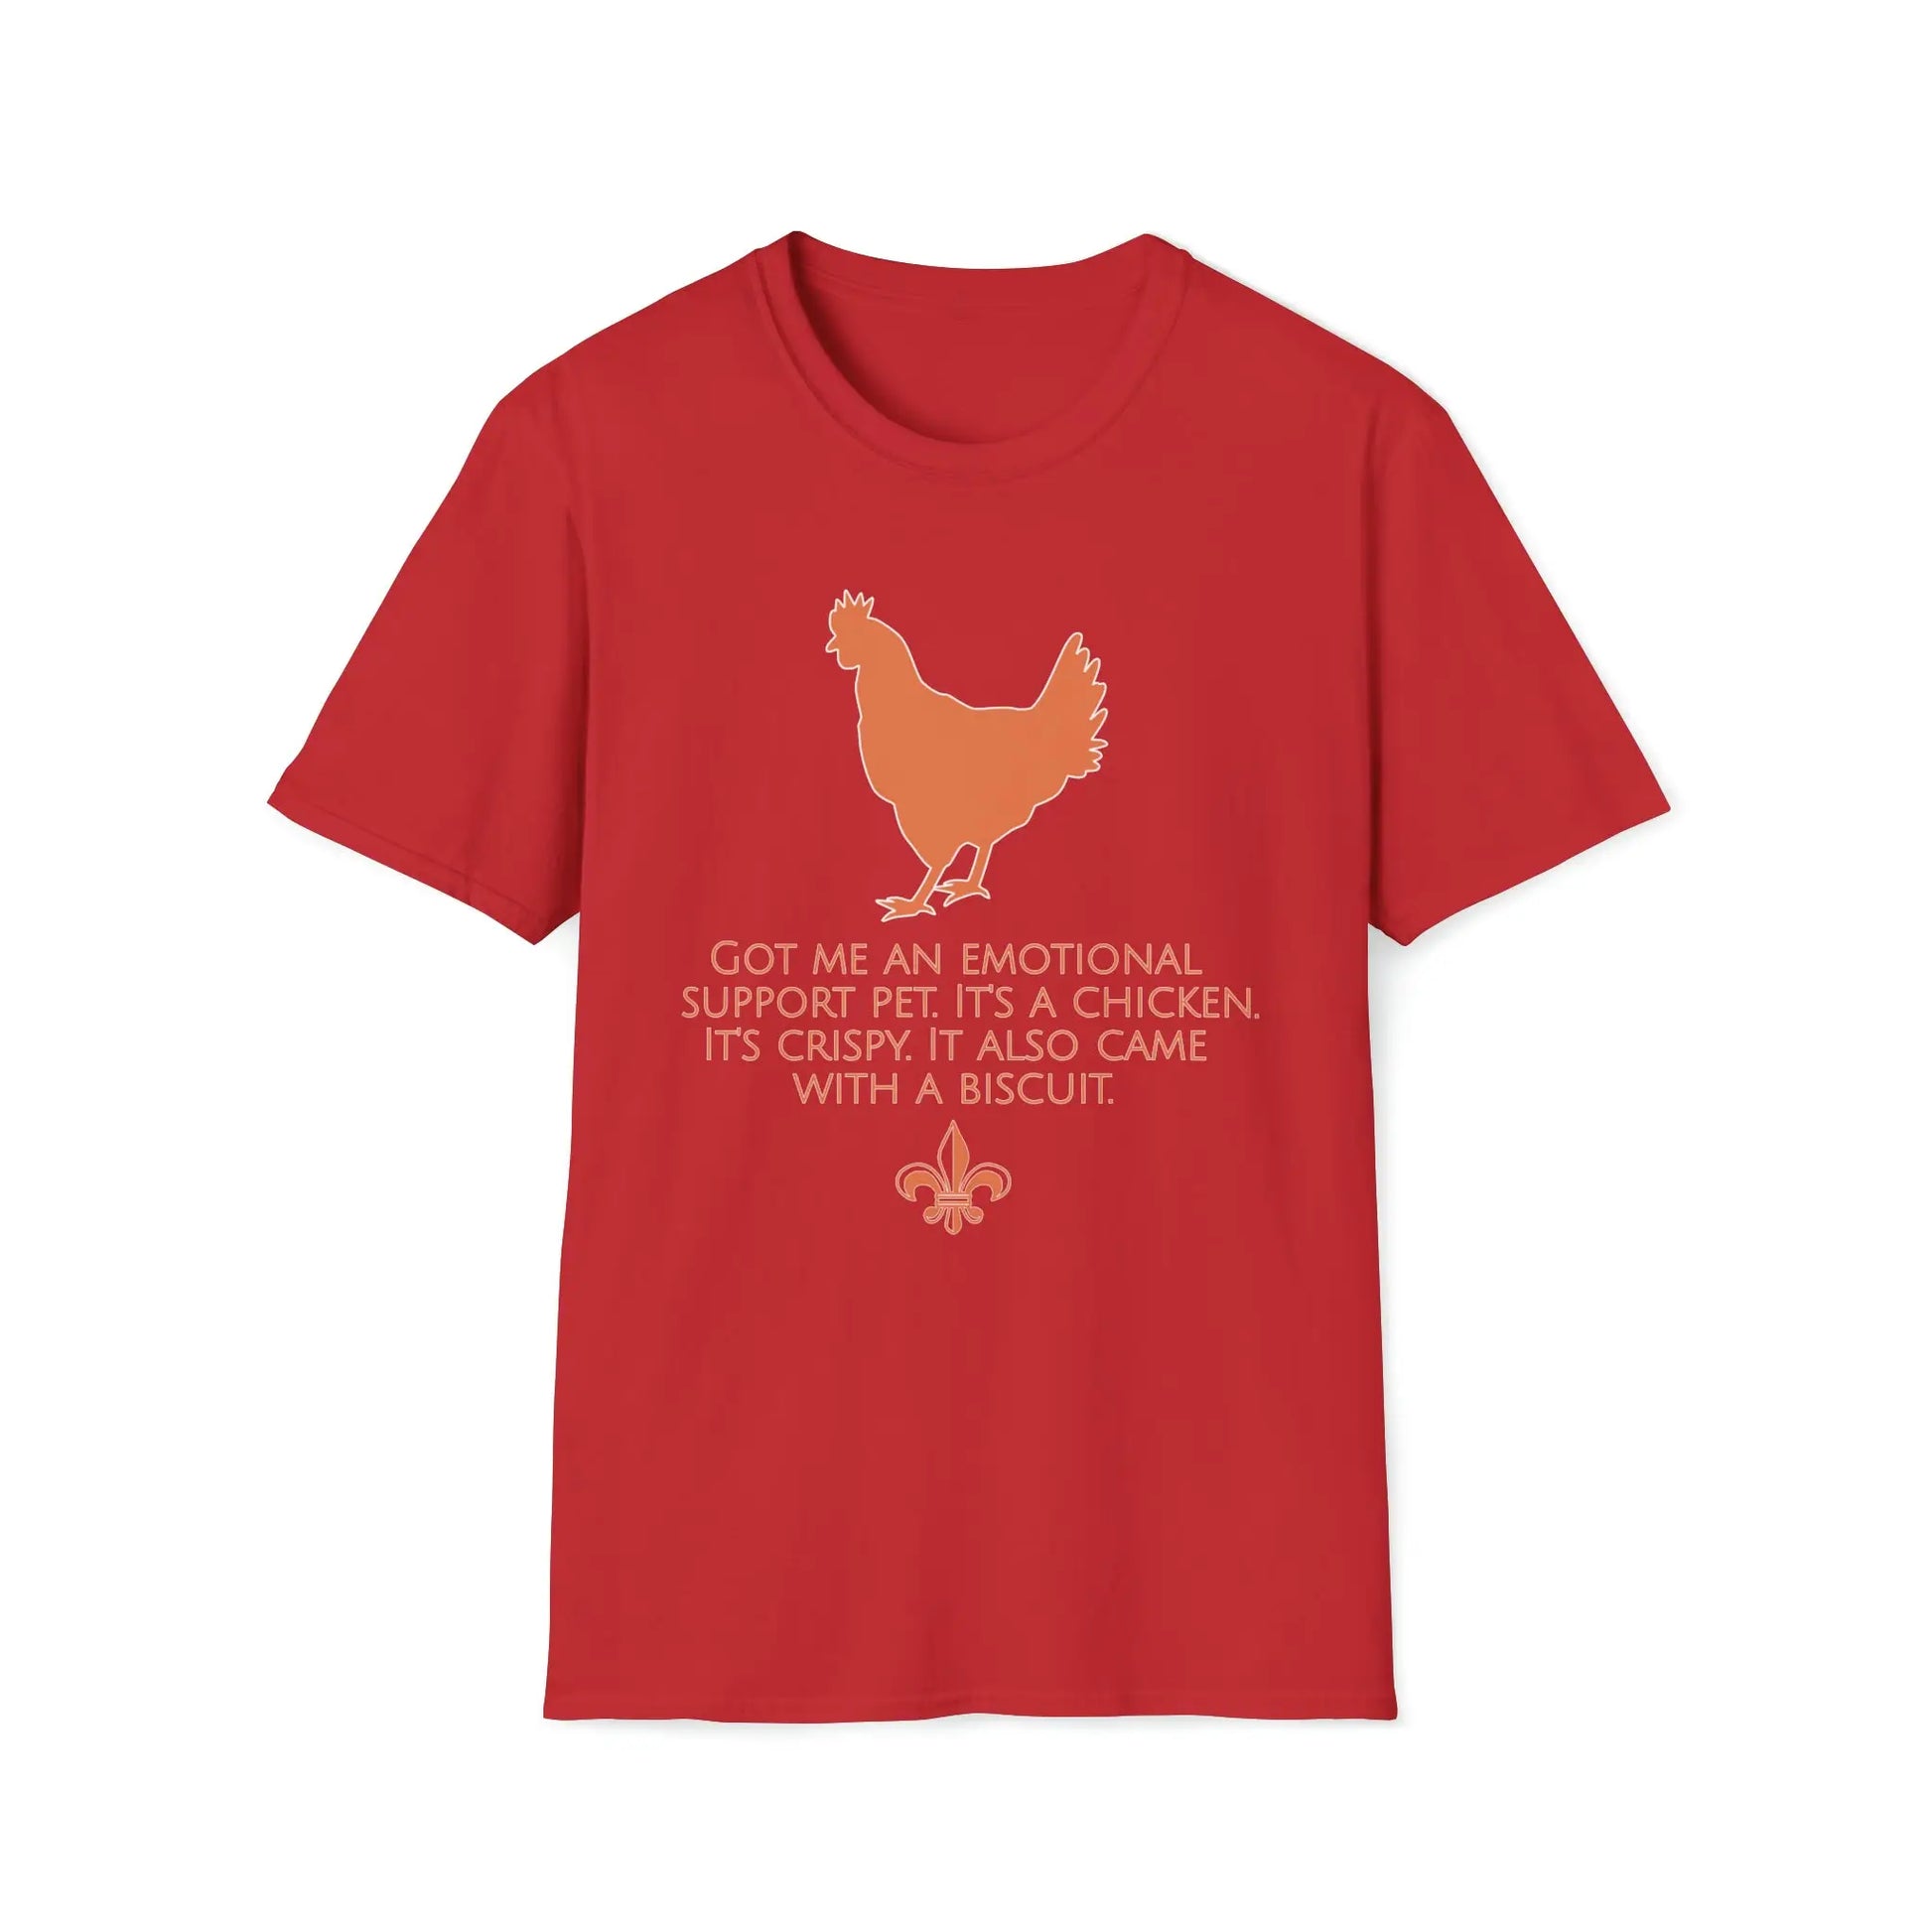 Cluck Yes Women's Tee - Wicked Tees